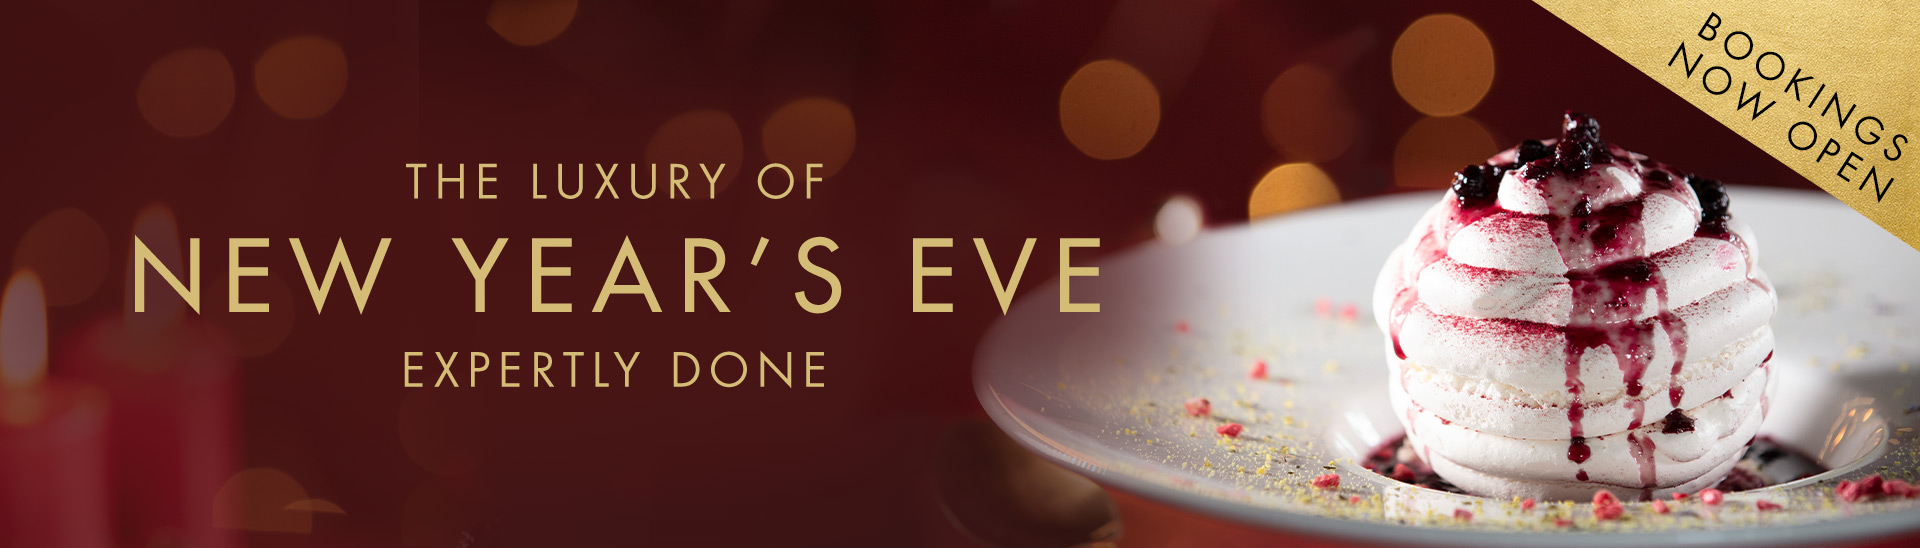 New Year’s Eve Menu at Miller & Carter Swindon • Book Now